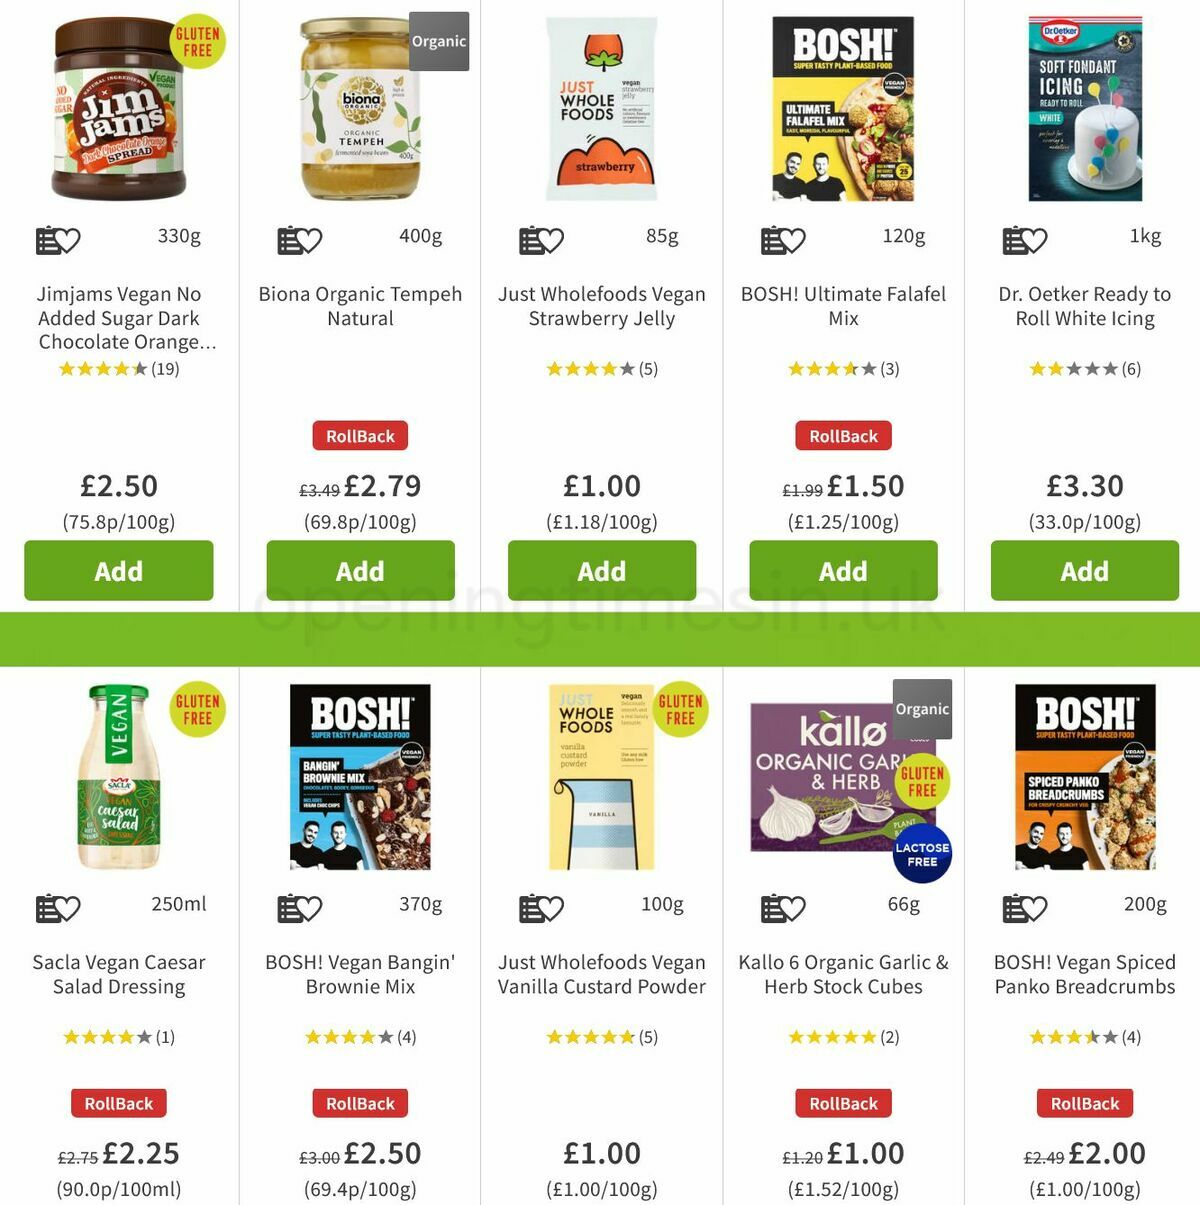 ASDA Offers from 15 January